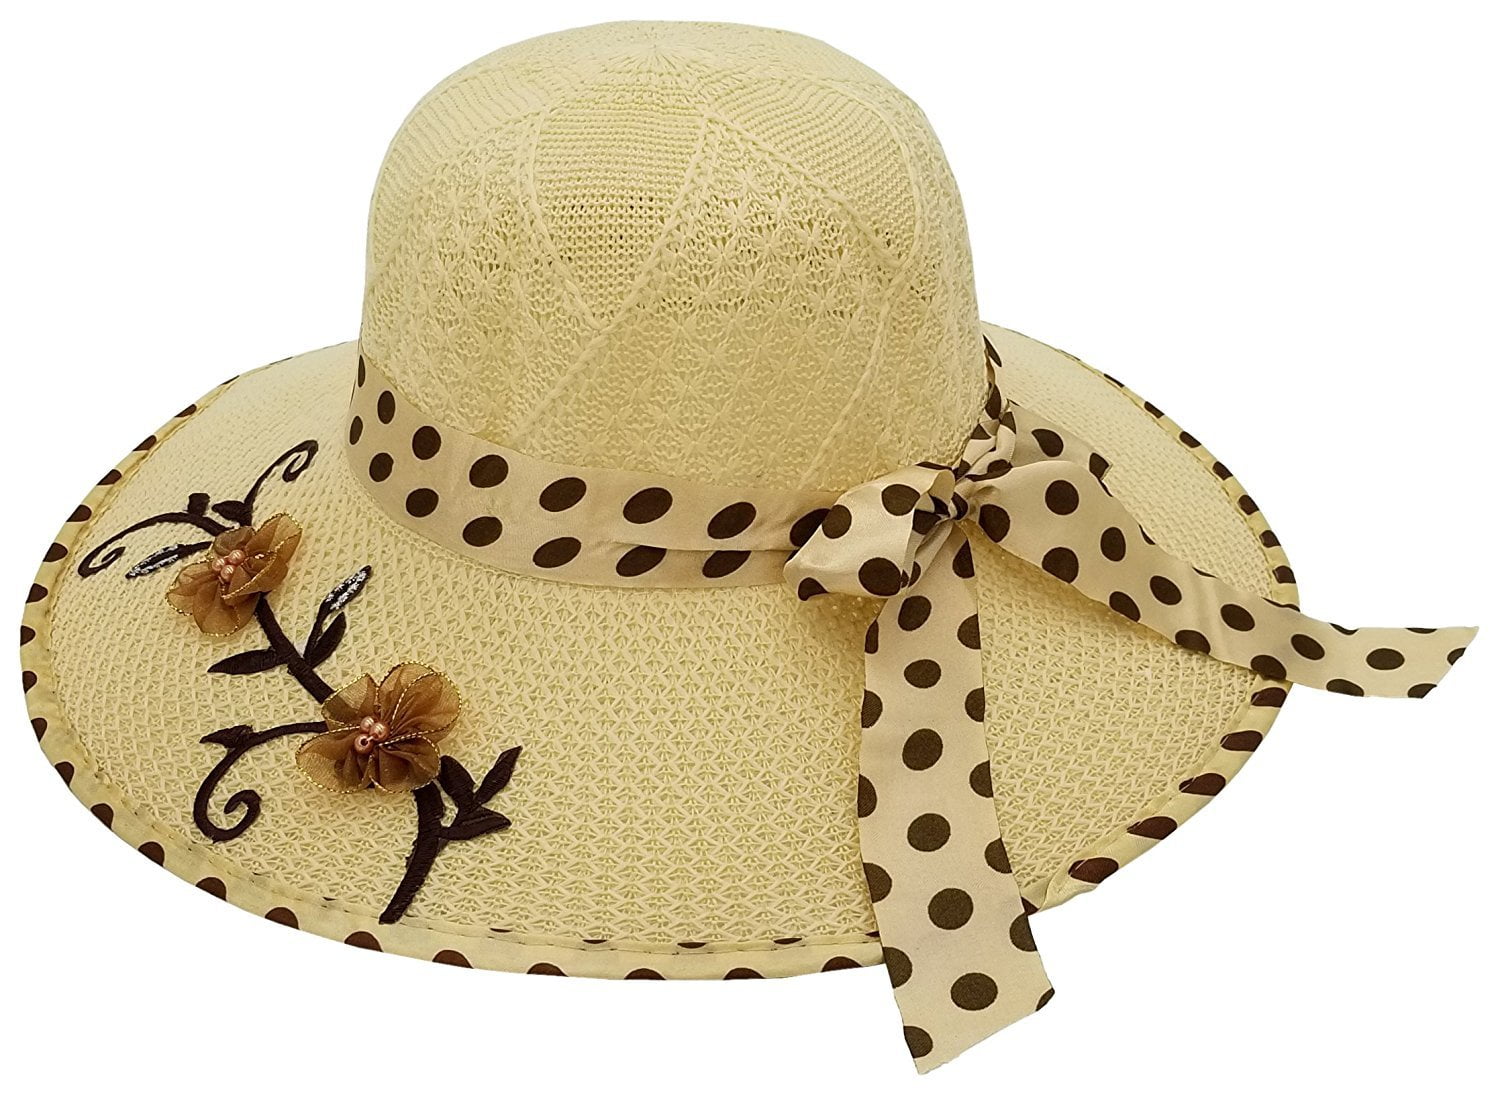 Ladies Womens Colored Straw Woven Summer Hats w/ Polka Dot Bow 